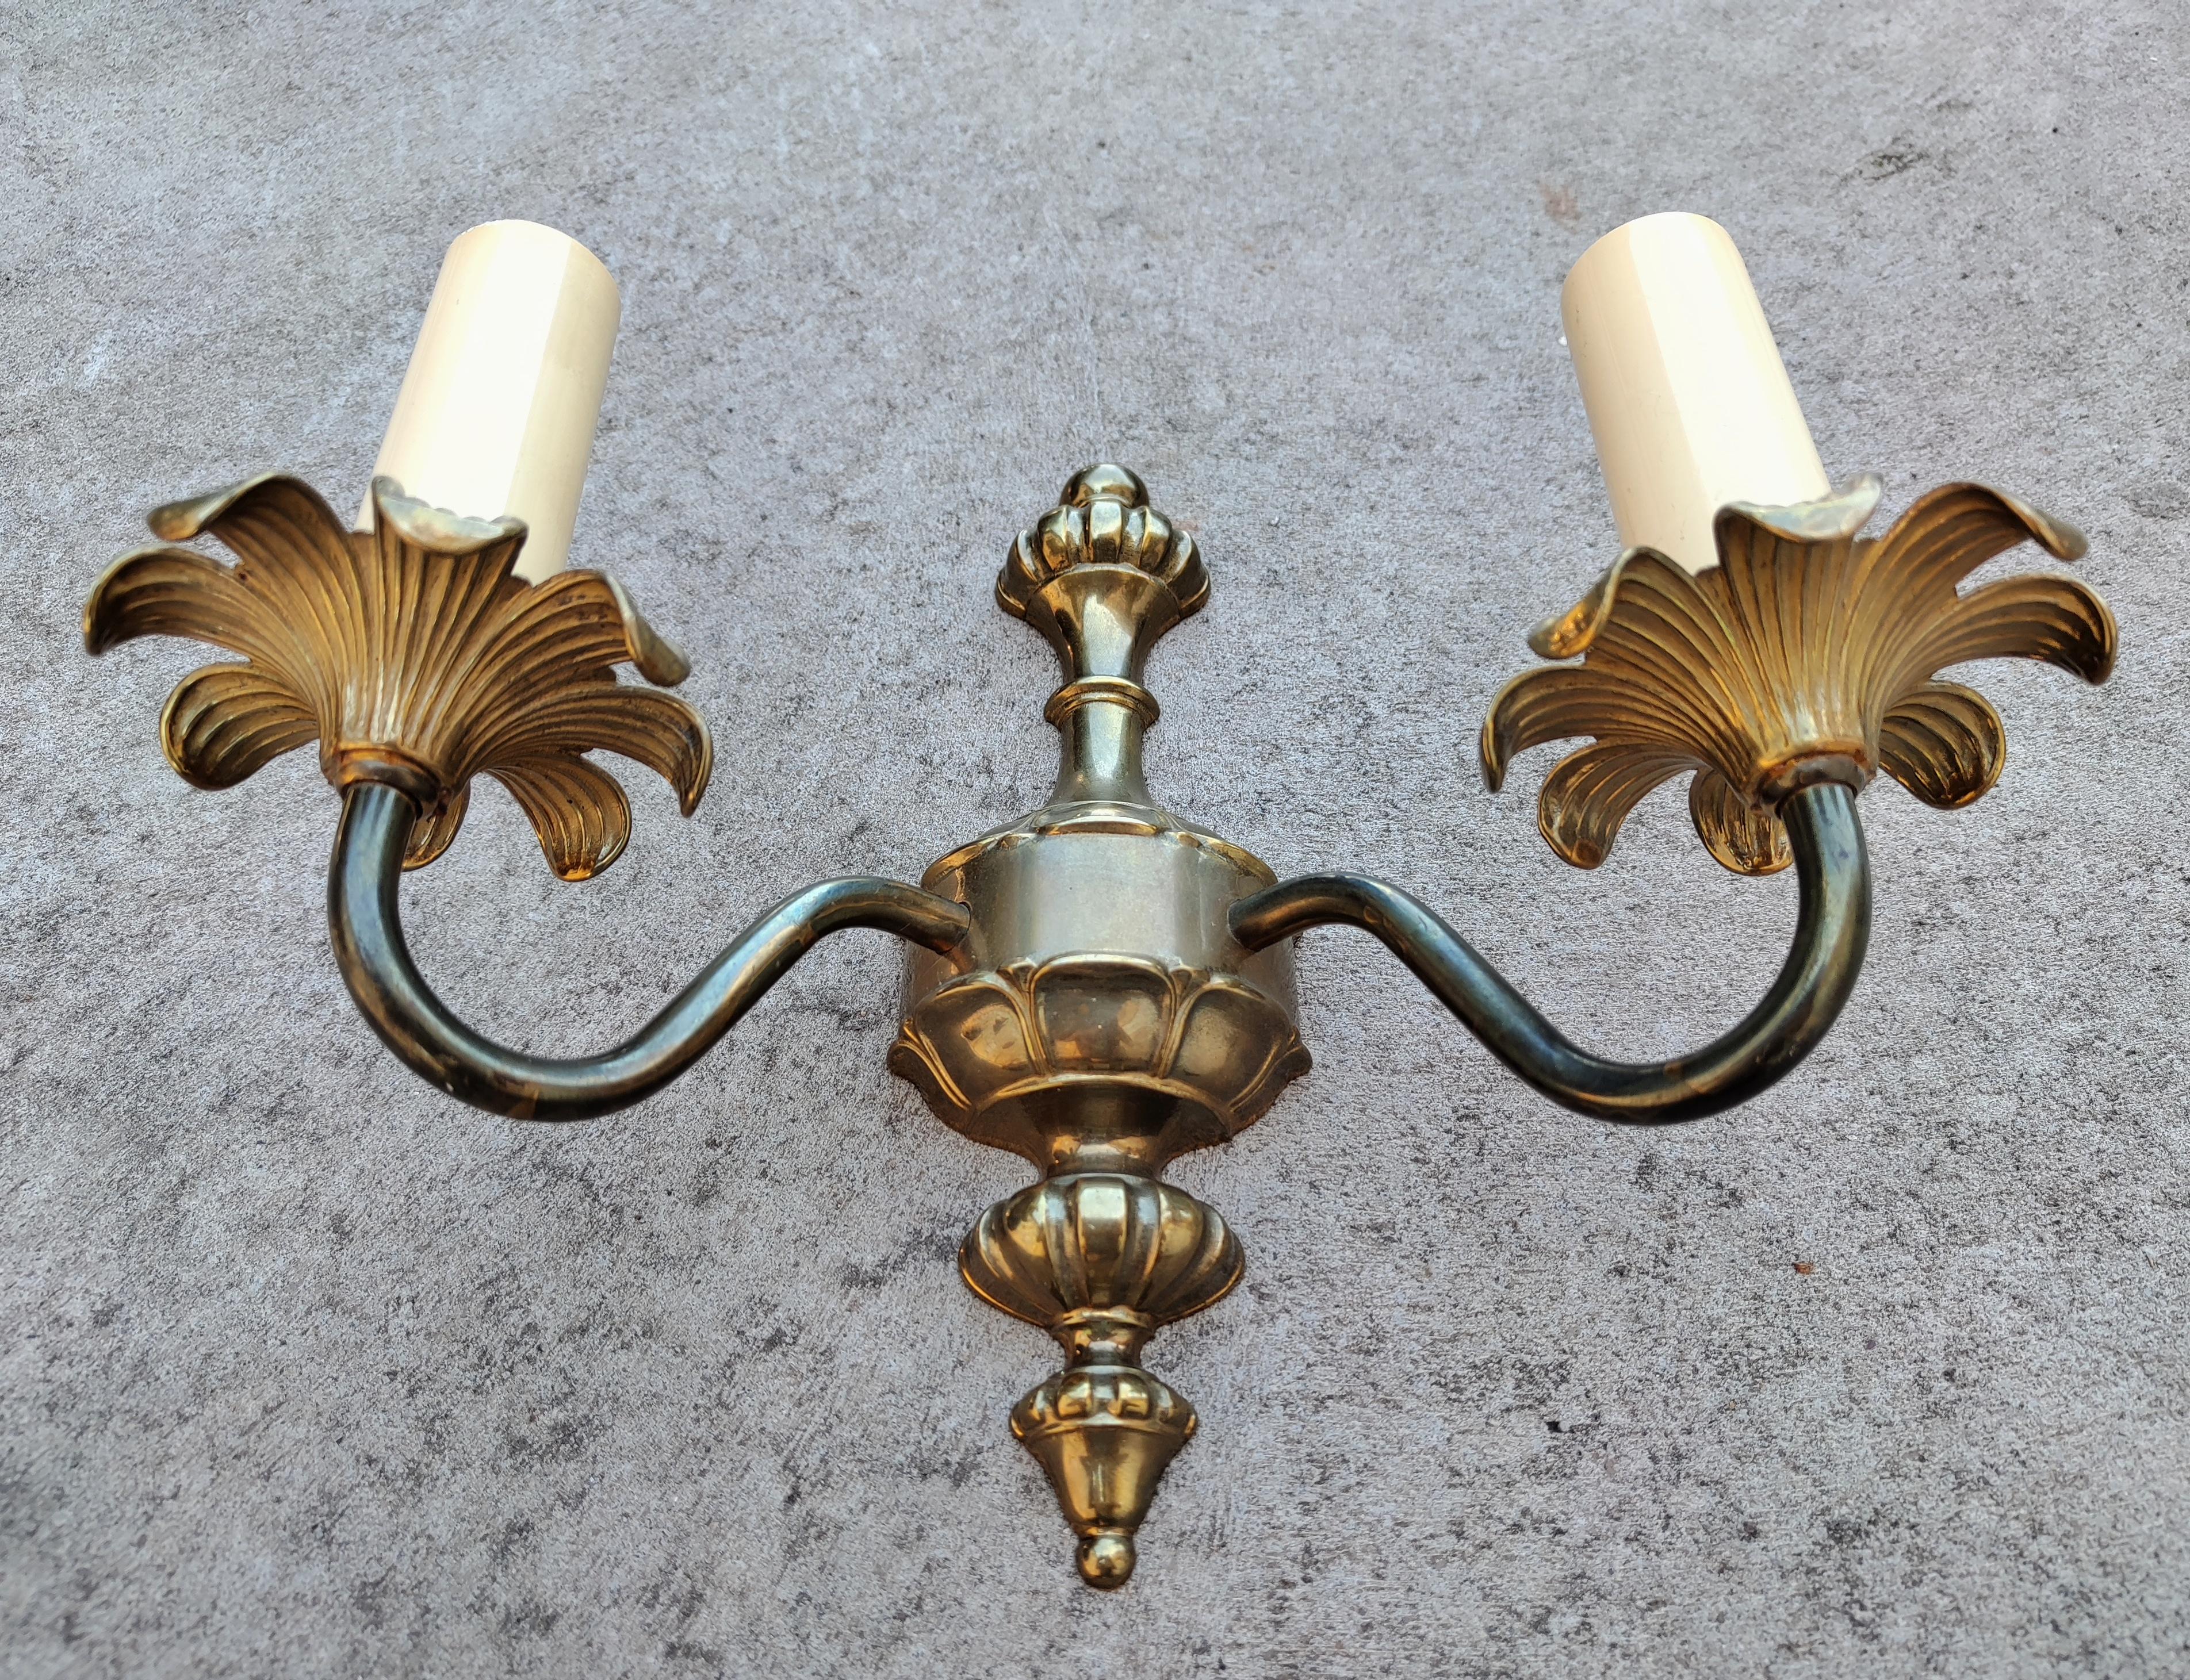 In this listing you will find a pair of Neoclassical style sconces done in solid bronze and designed by J. Sommer. Each sconce features 2 light spots, with floral details. Manufacturer's label is still attached. Made in Sweden in 1960s.

Very good